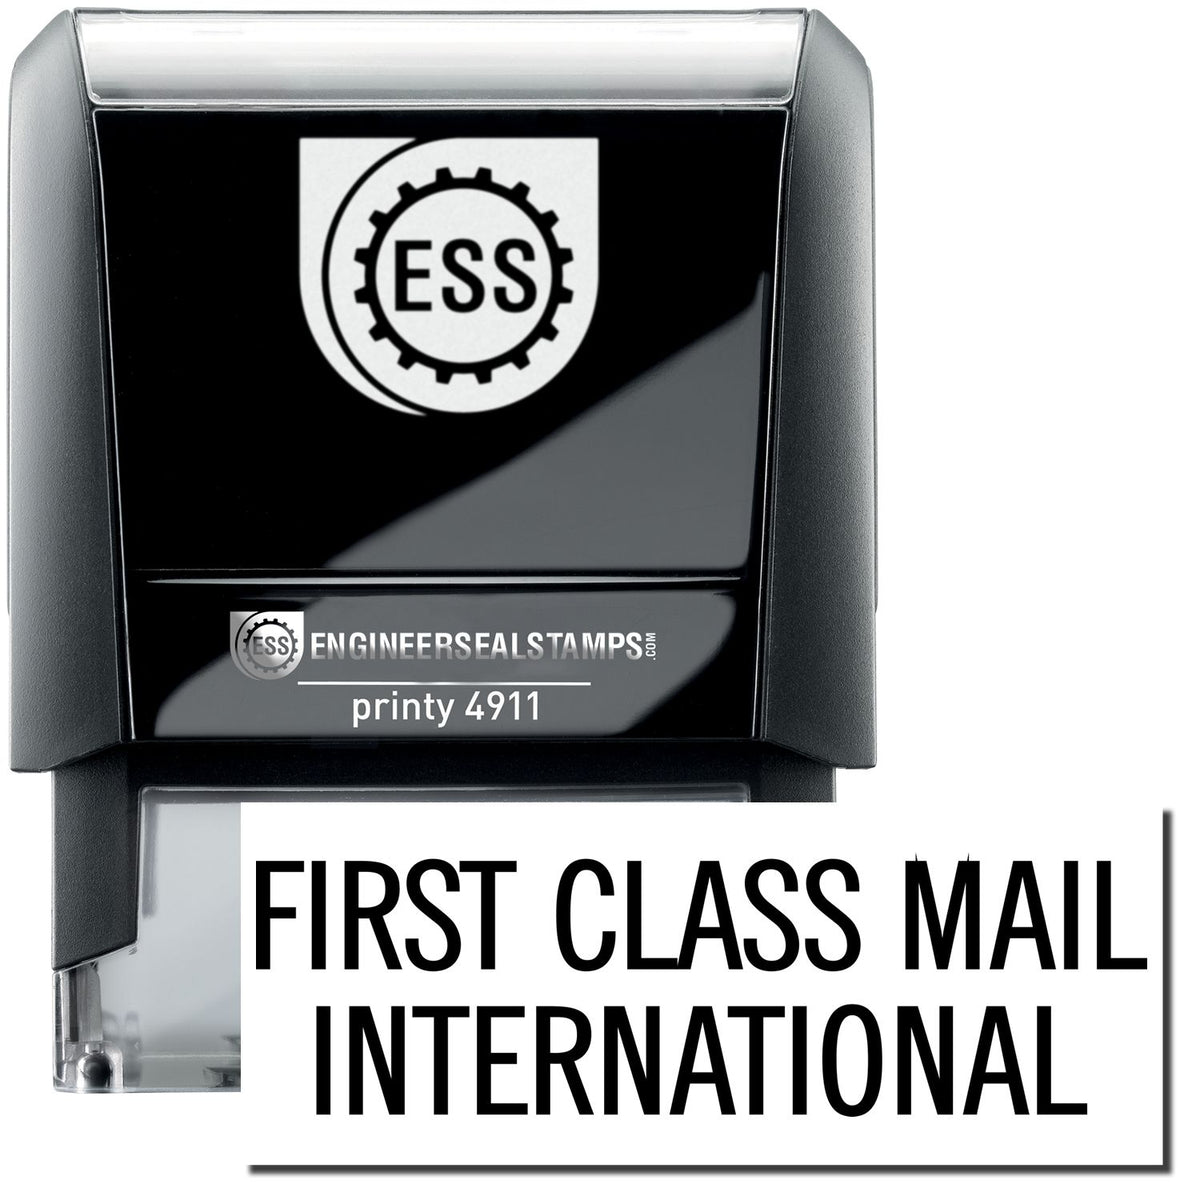 A self-inking stamp with a stamped image showing how the text &quot;FIRST CLASS MAIL INTERNATIONAL&quot; is displayed after stamping.